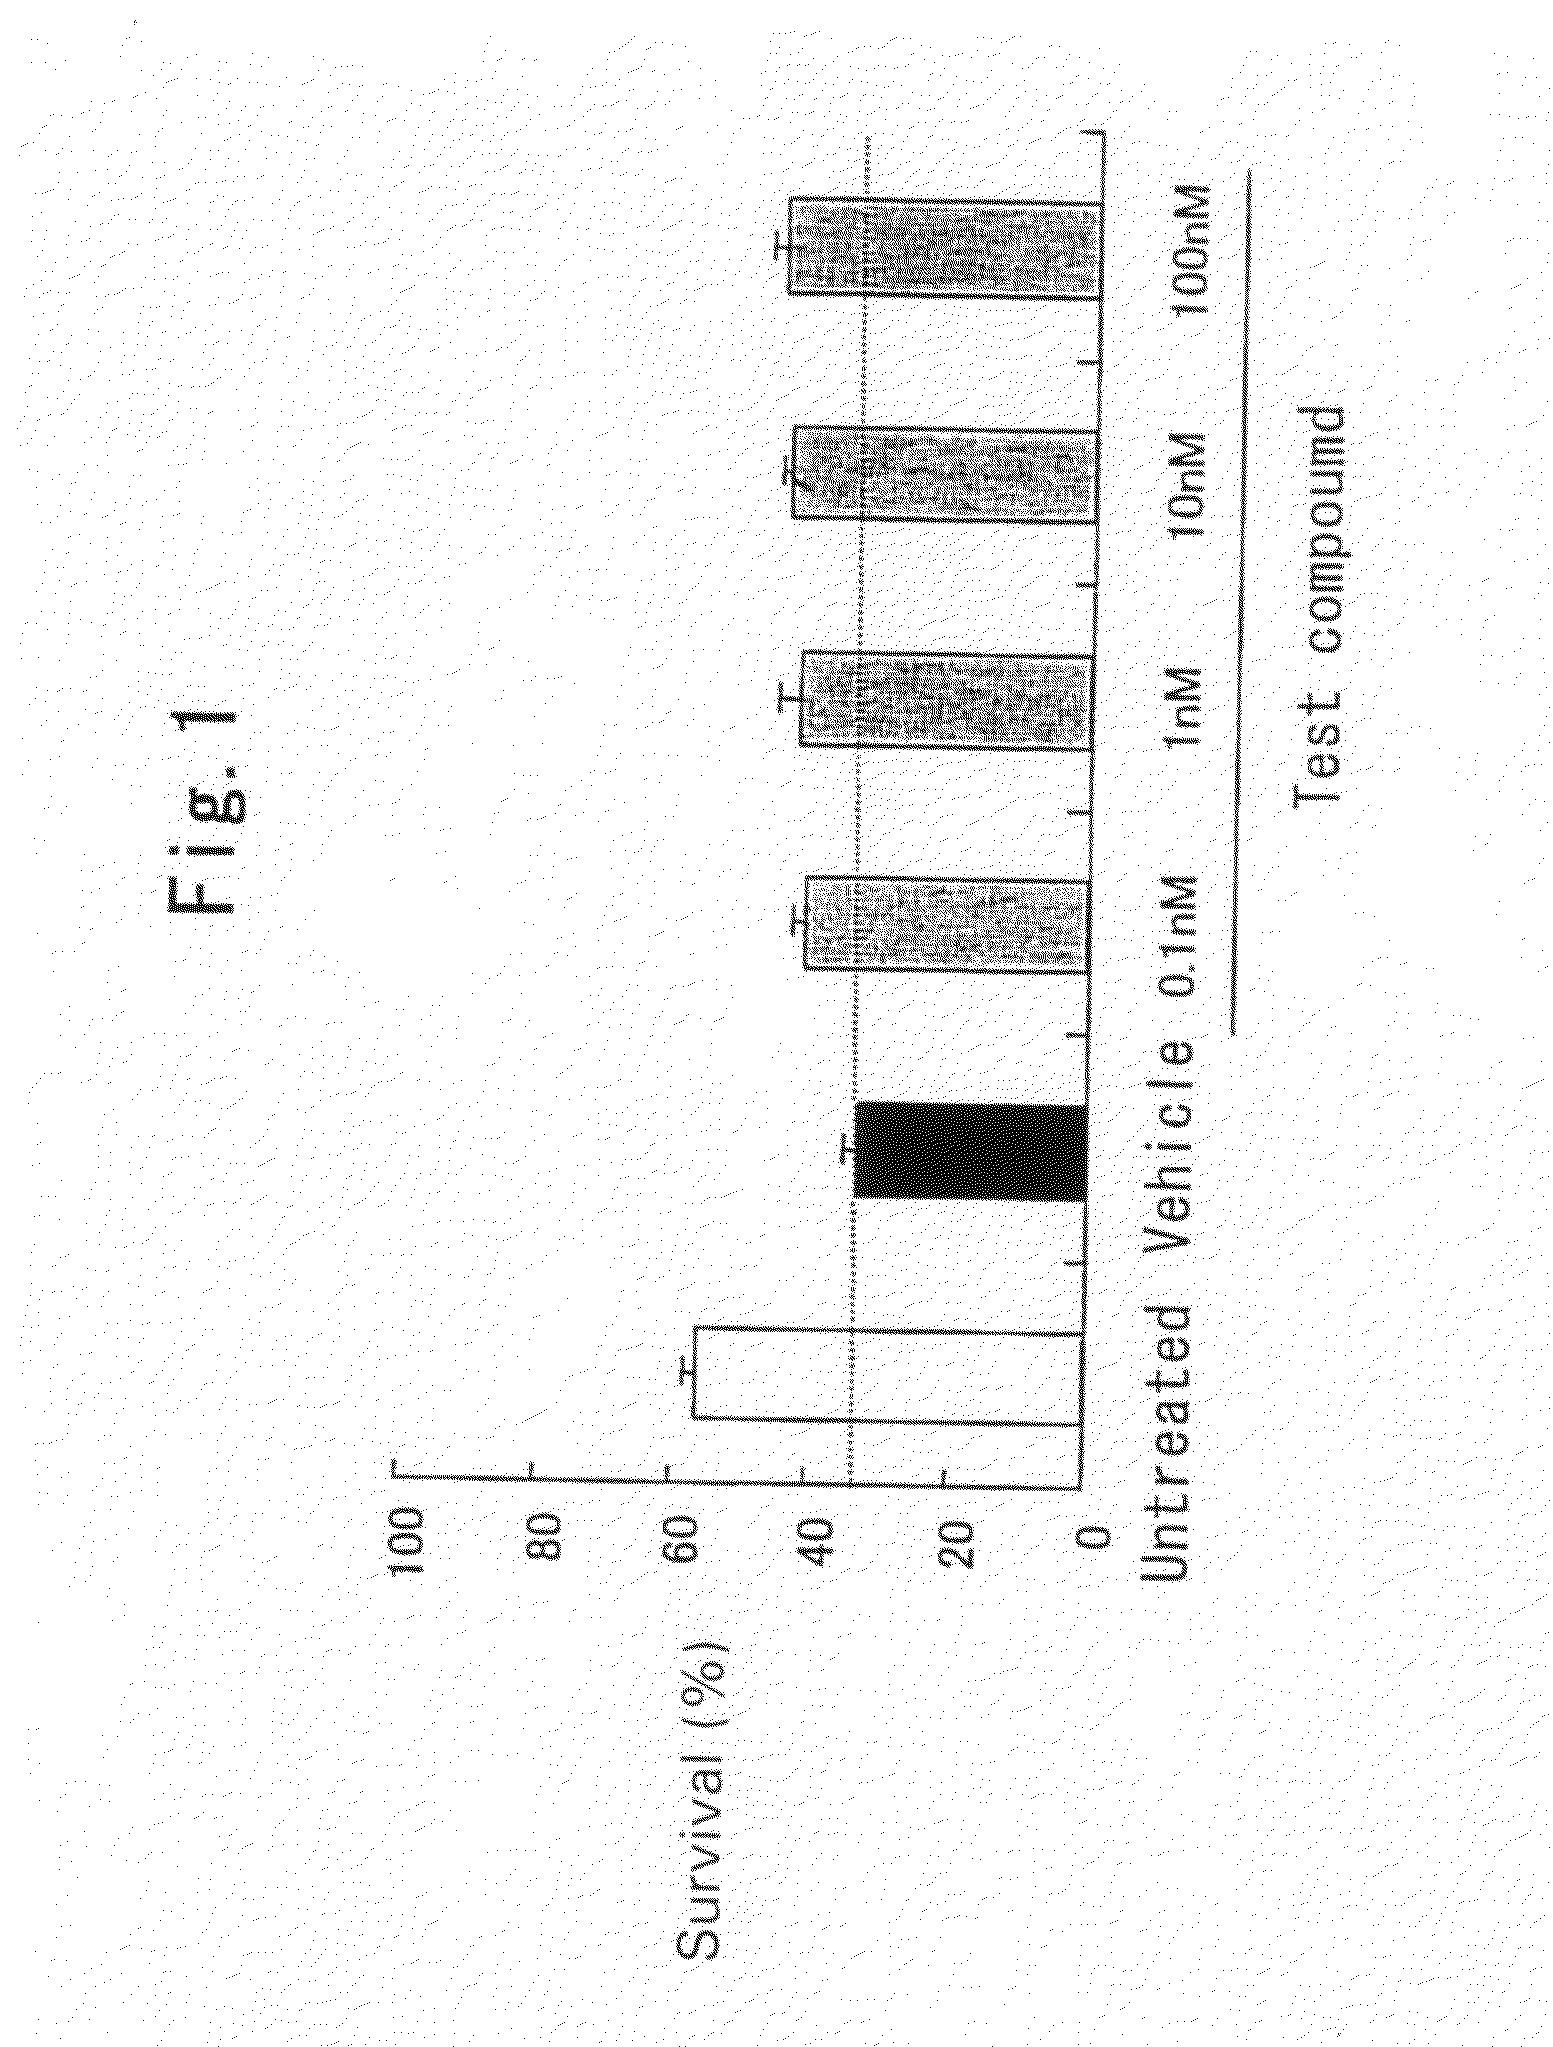 Method for protecting a retinal neuronal cell